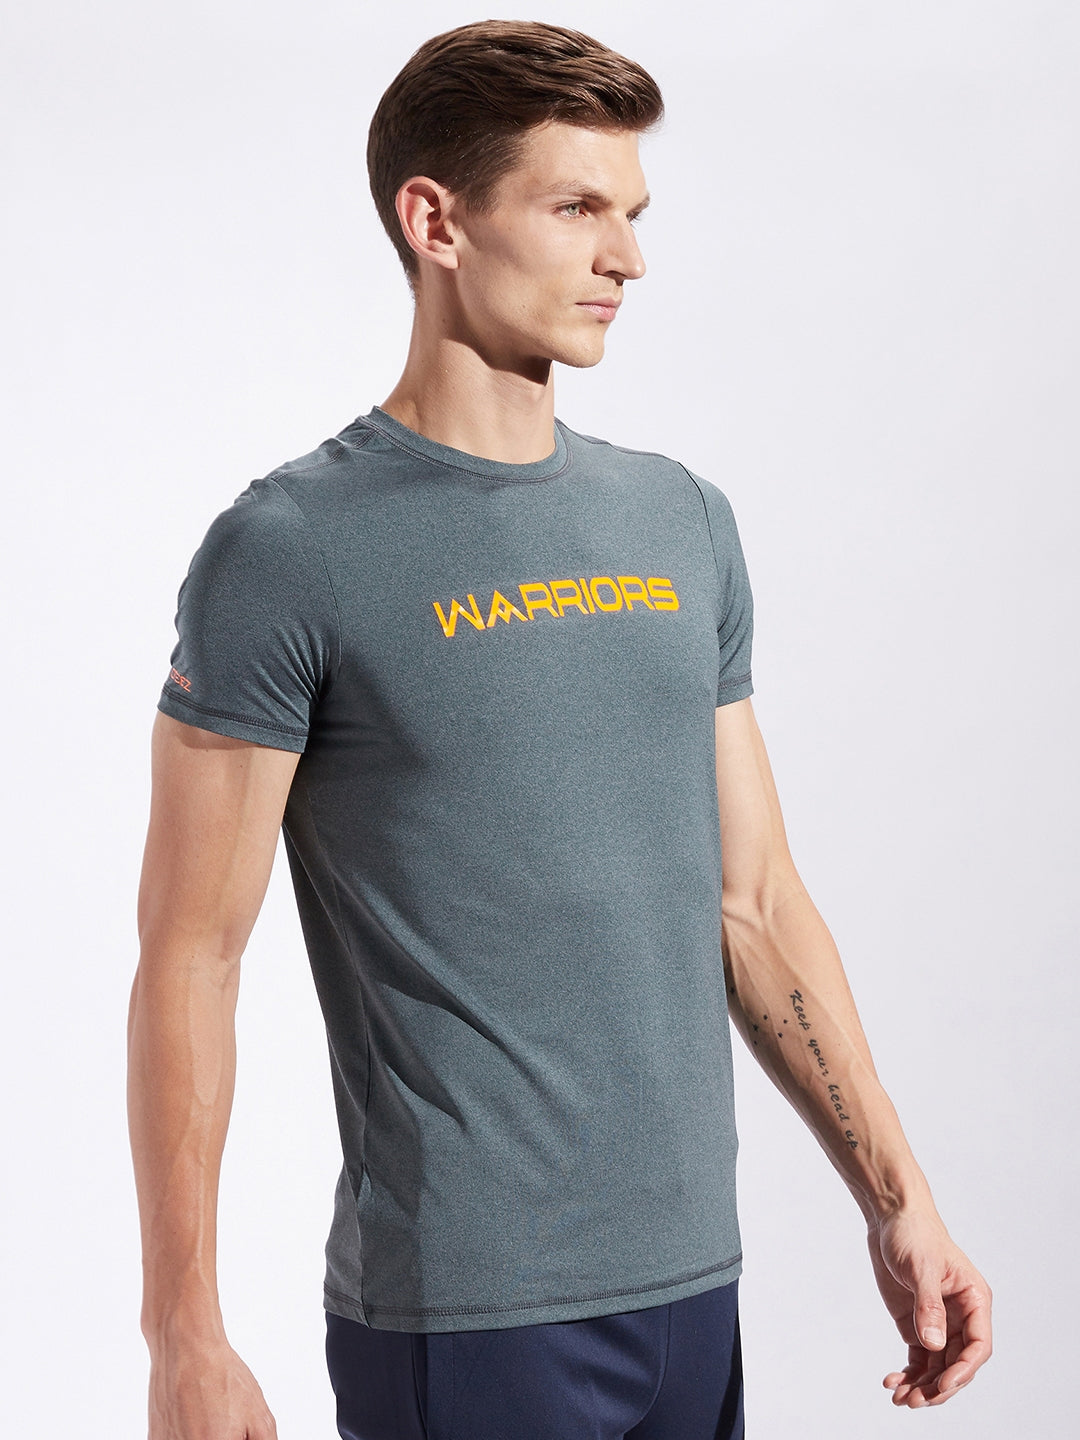 Warrior Stretchable T-shirt 1